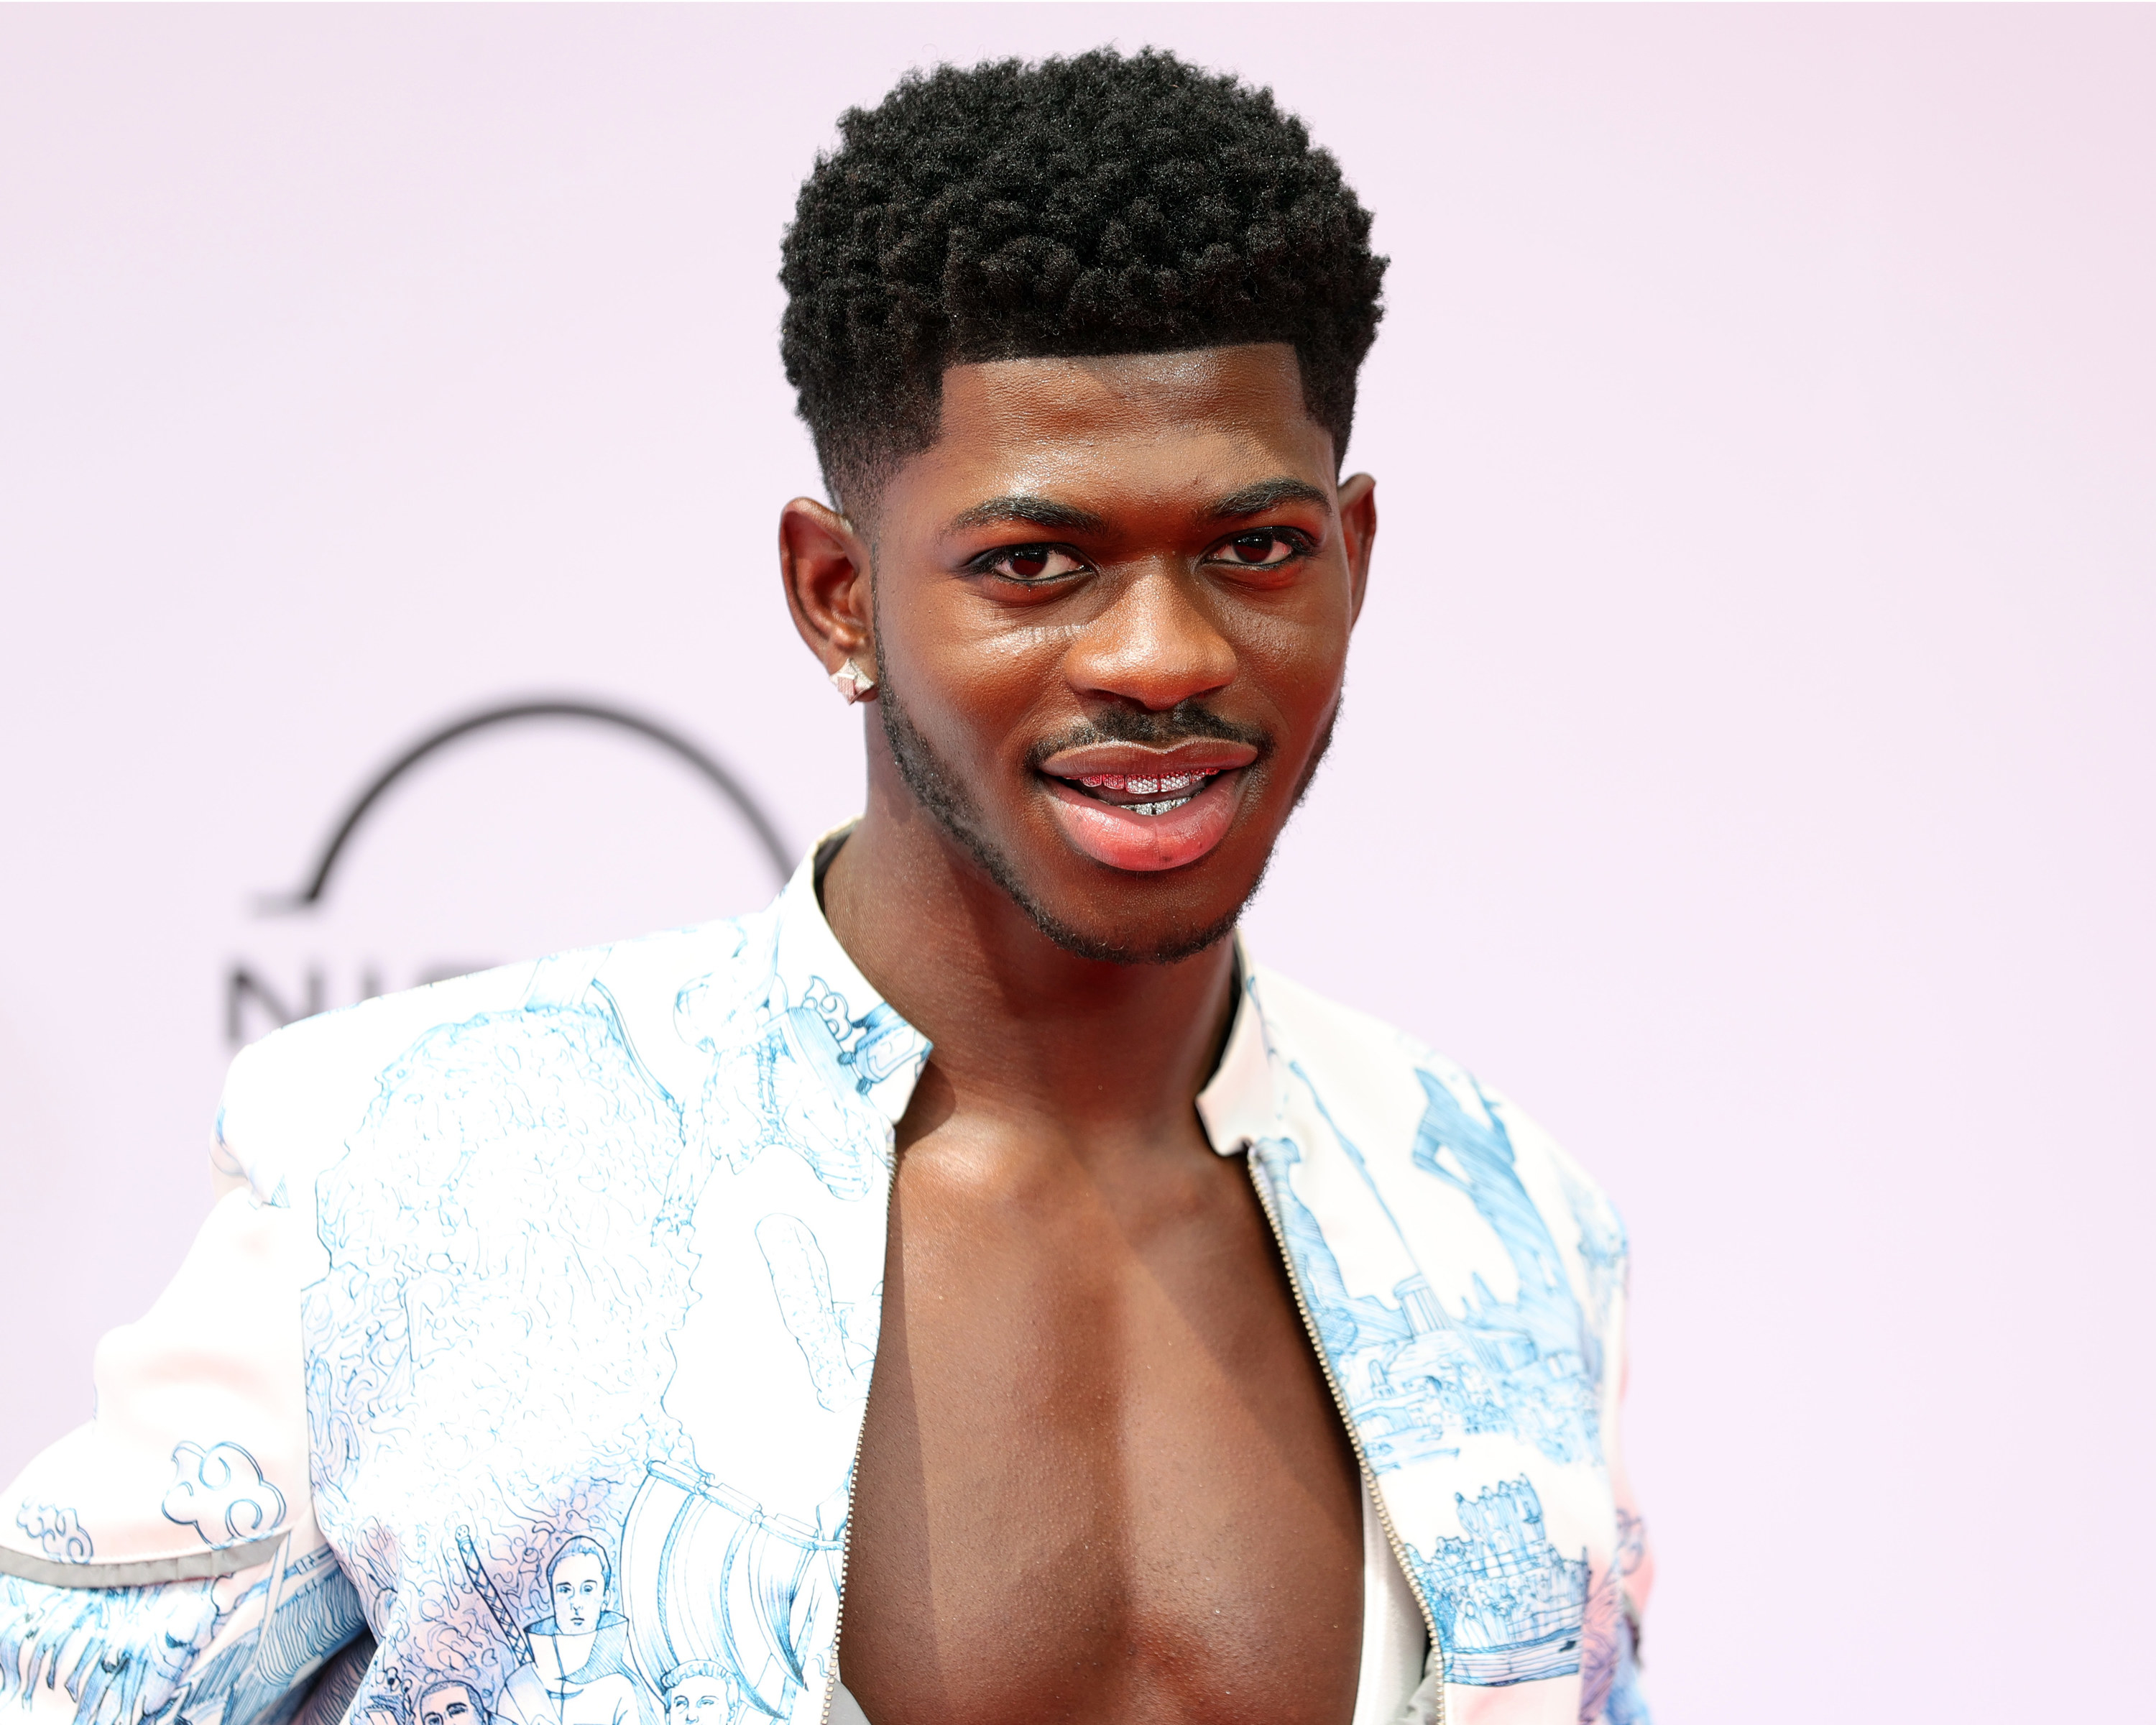 Lil Nas X attends the BET Awards 2021 at Microsoft Theater on June 27, 2021 in Los Angeles, California